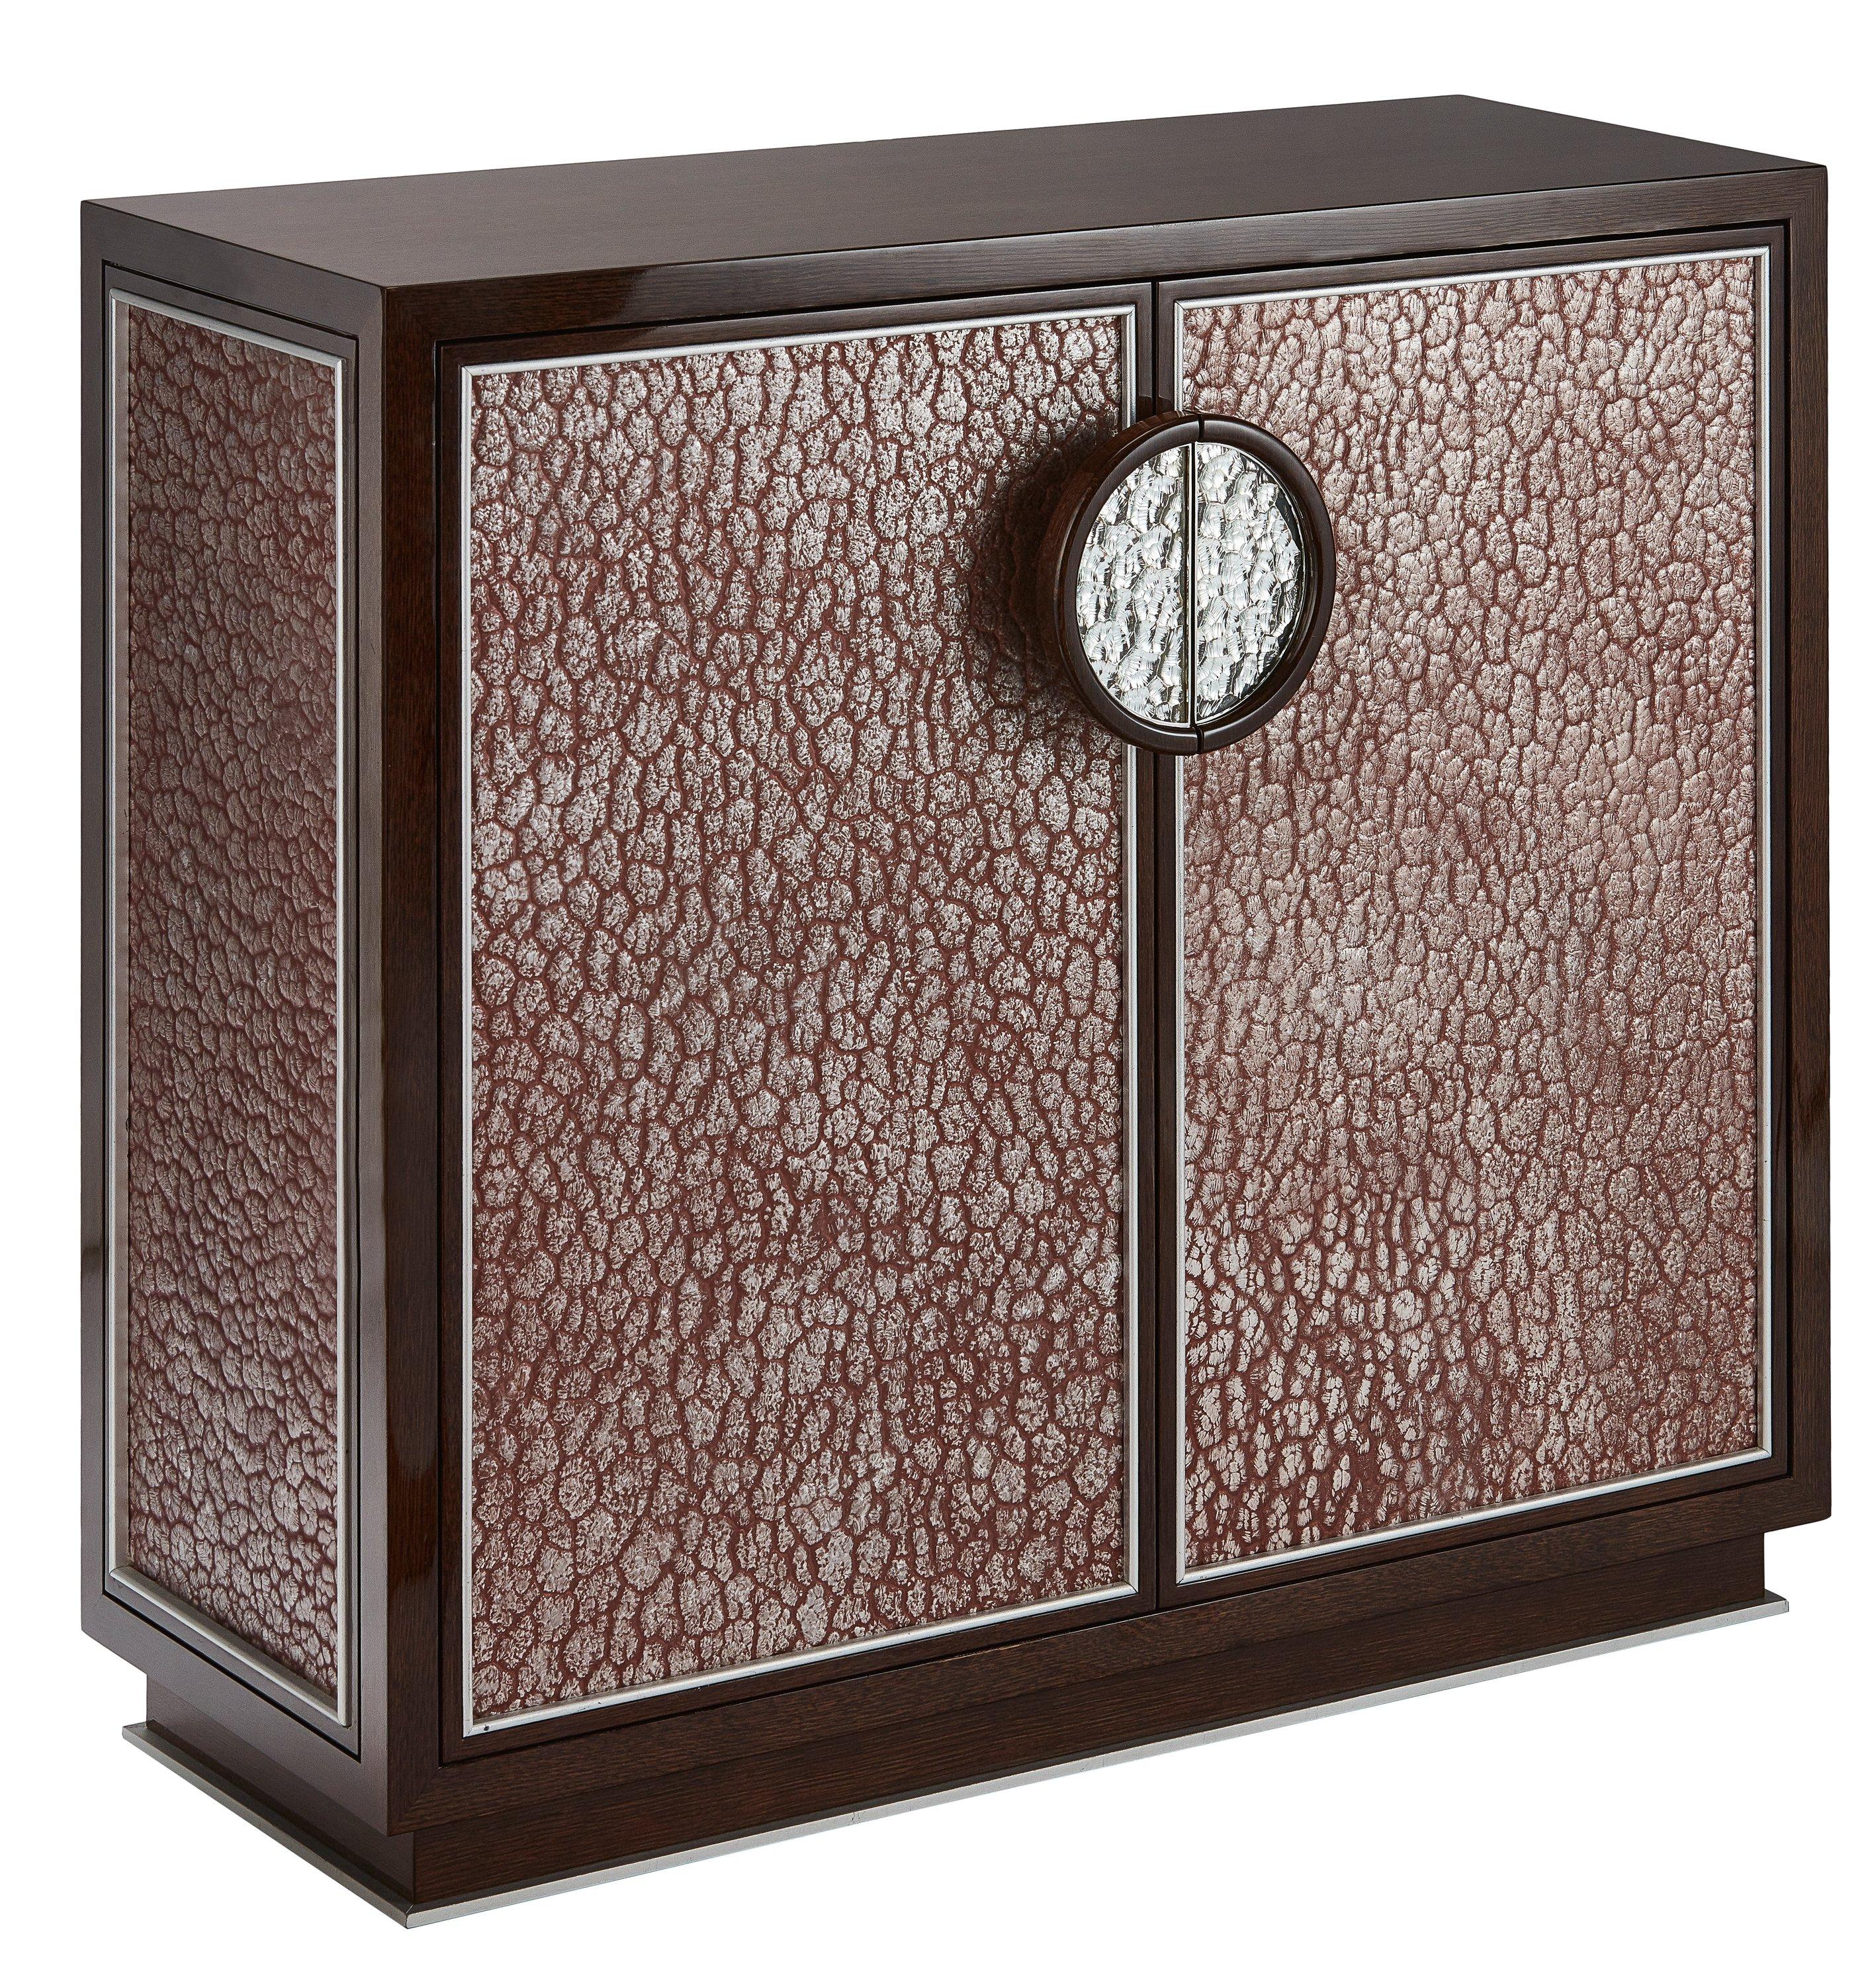 Polish Small Walnut Veneer Cabinet with Decorative Glass Platine Panels, Available Now For Sale